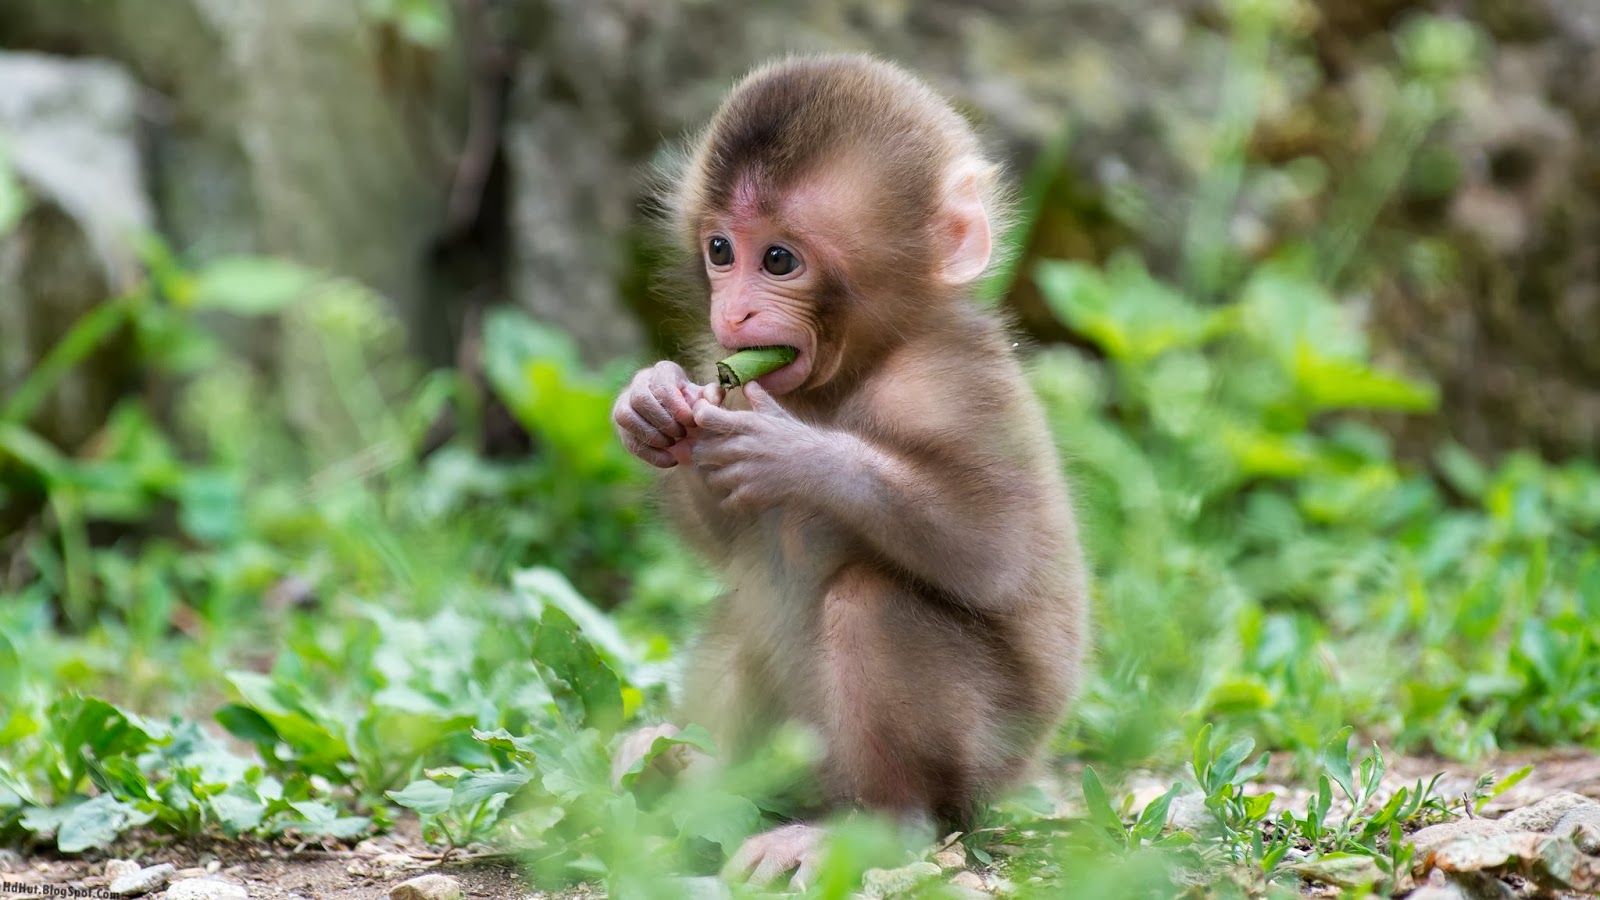  Cute And Beautiful Monkey Wallpapers In HD   Wallpapers And Pictures